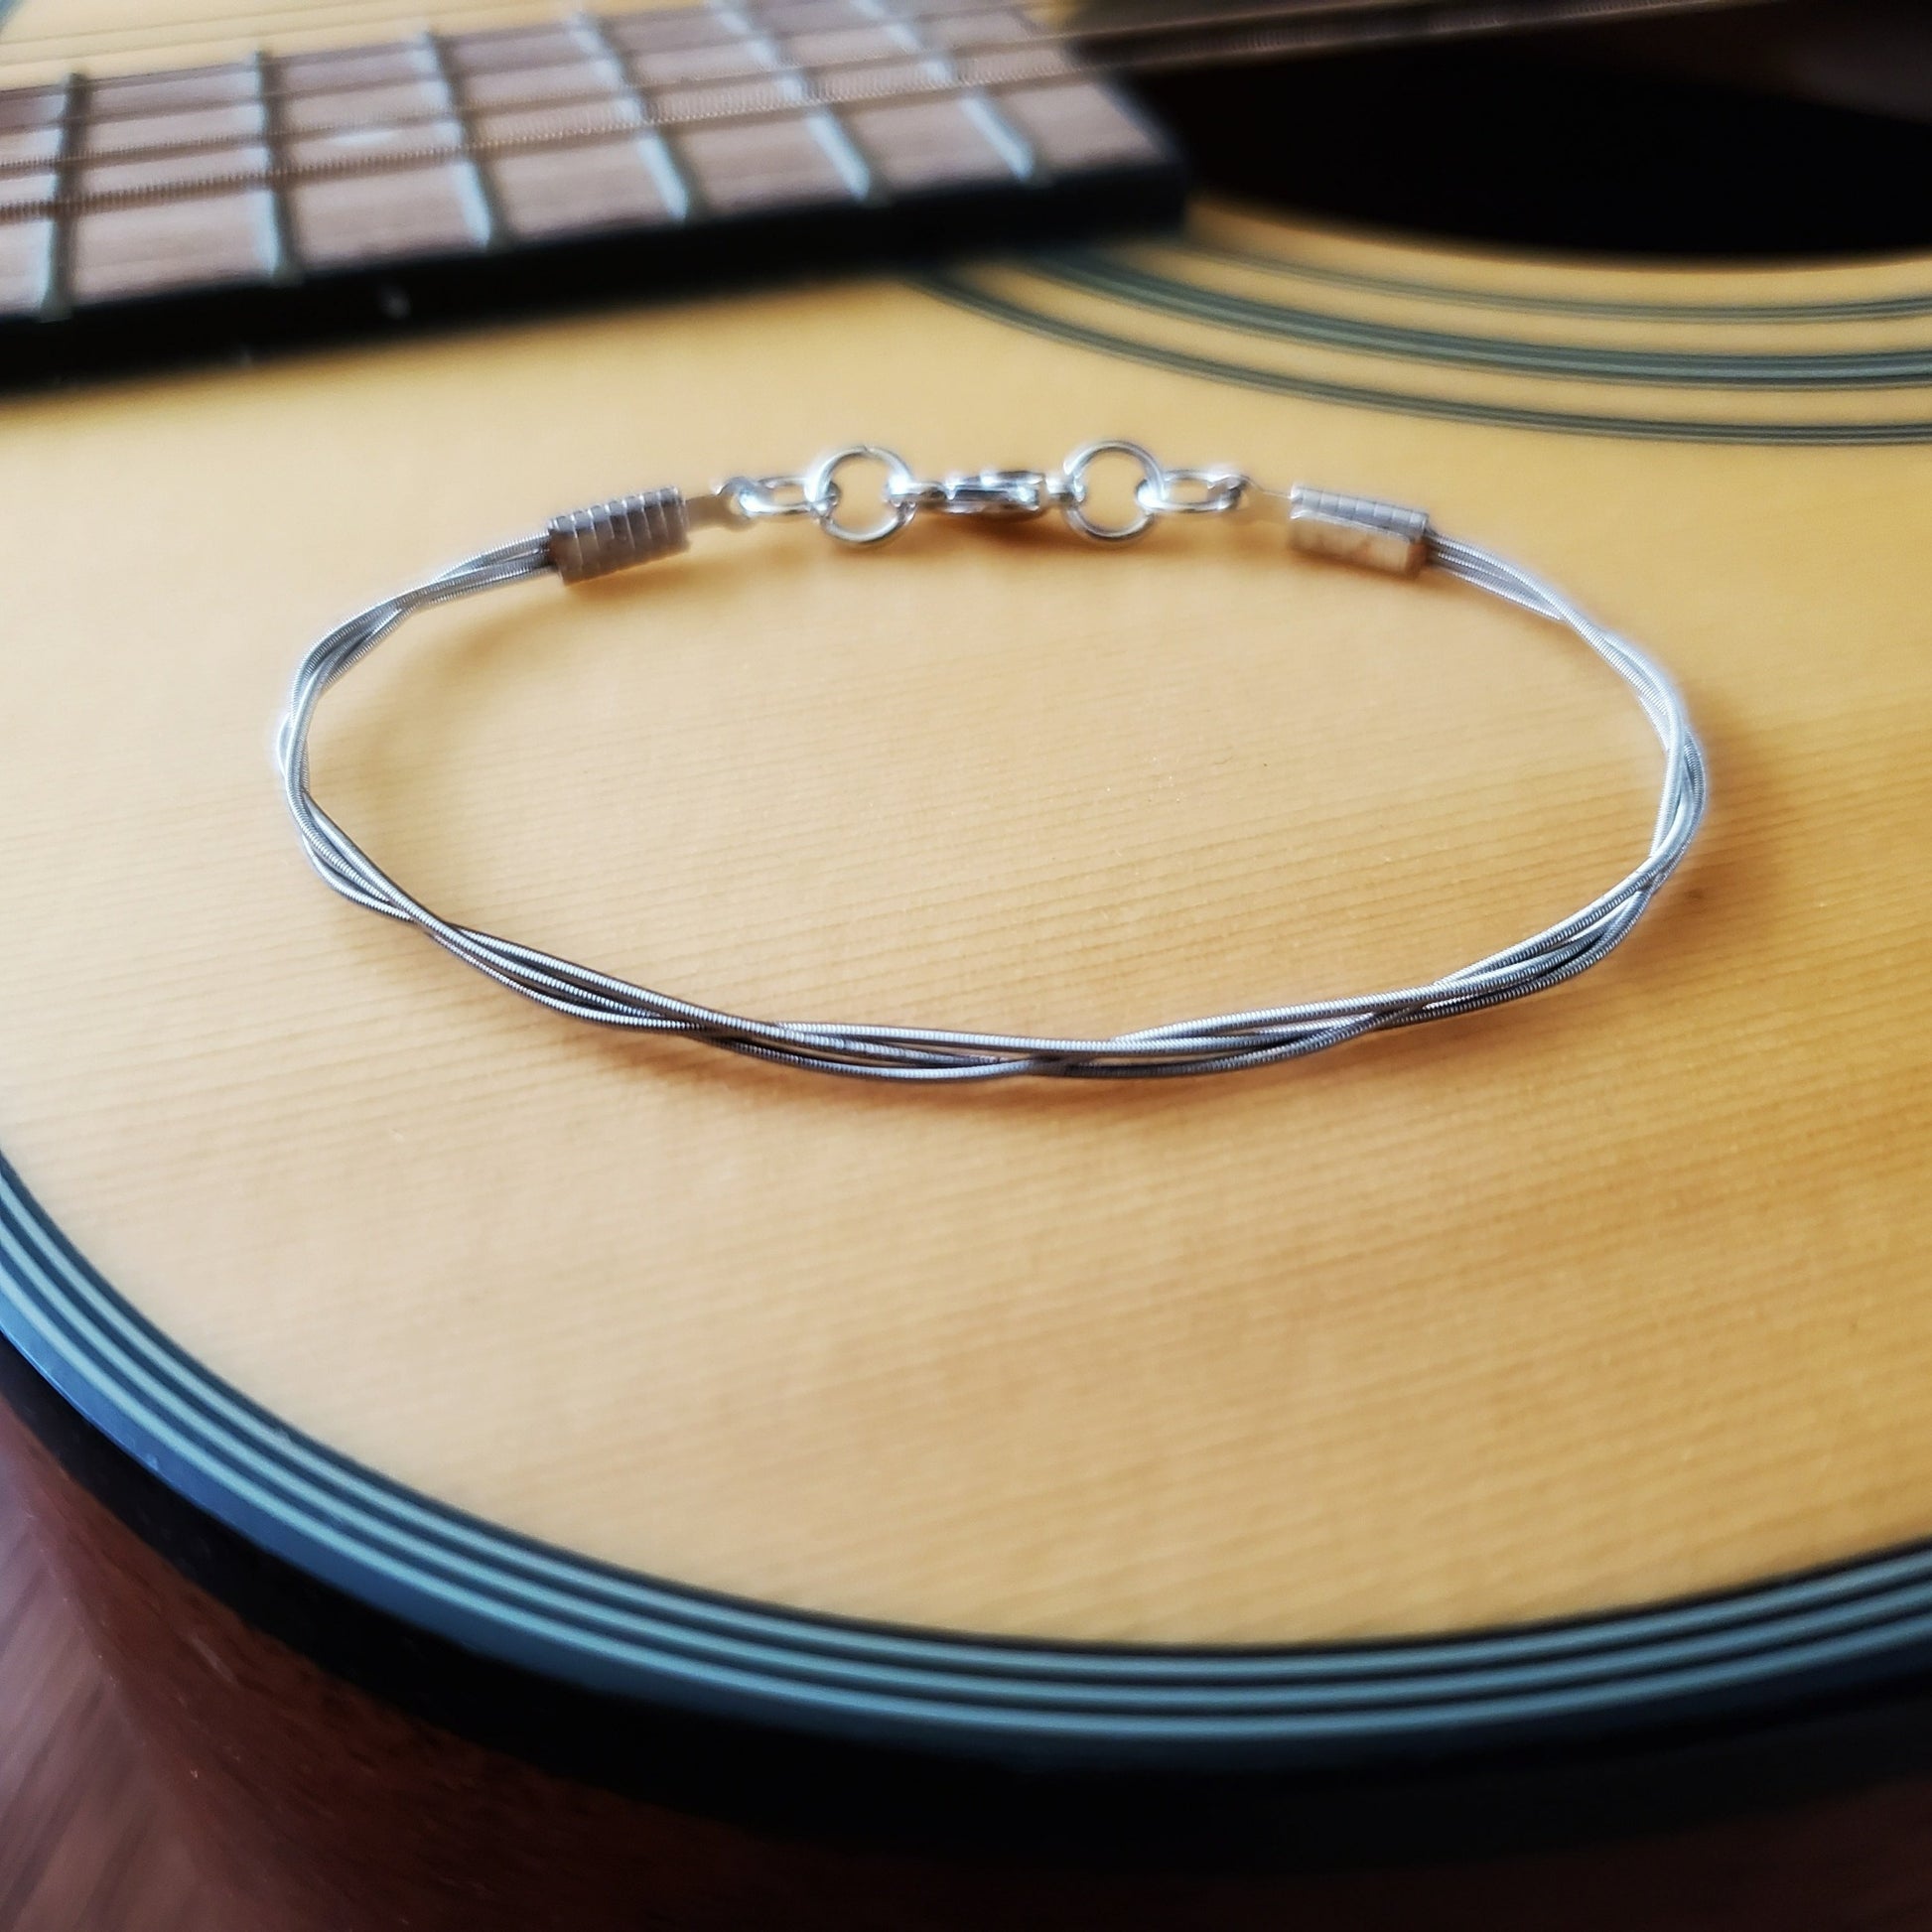 bracelet made from 3 strands of guitar strings braided together sitting on the body of a tan coloured acoustic guitar